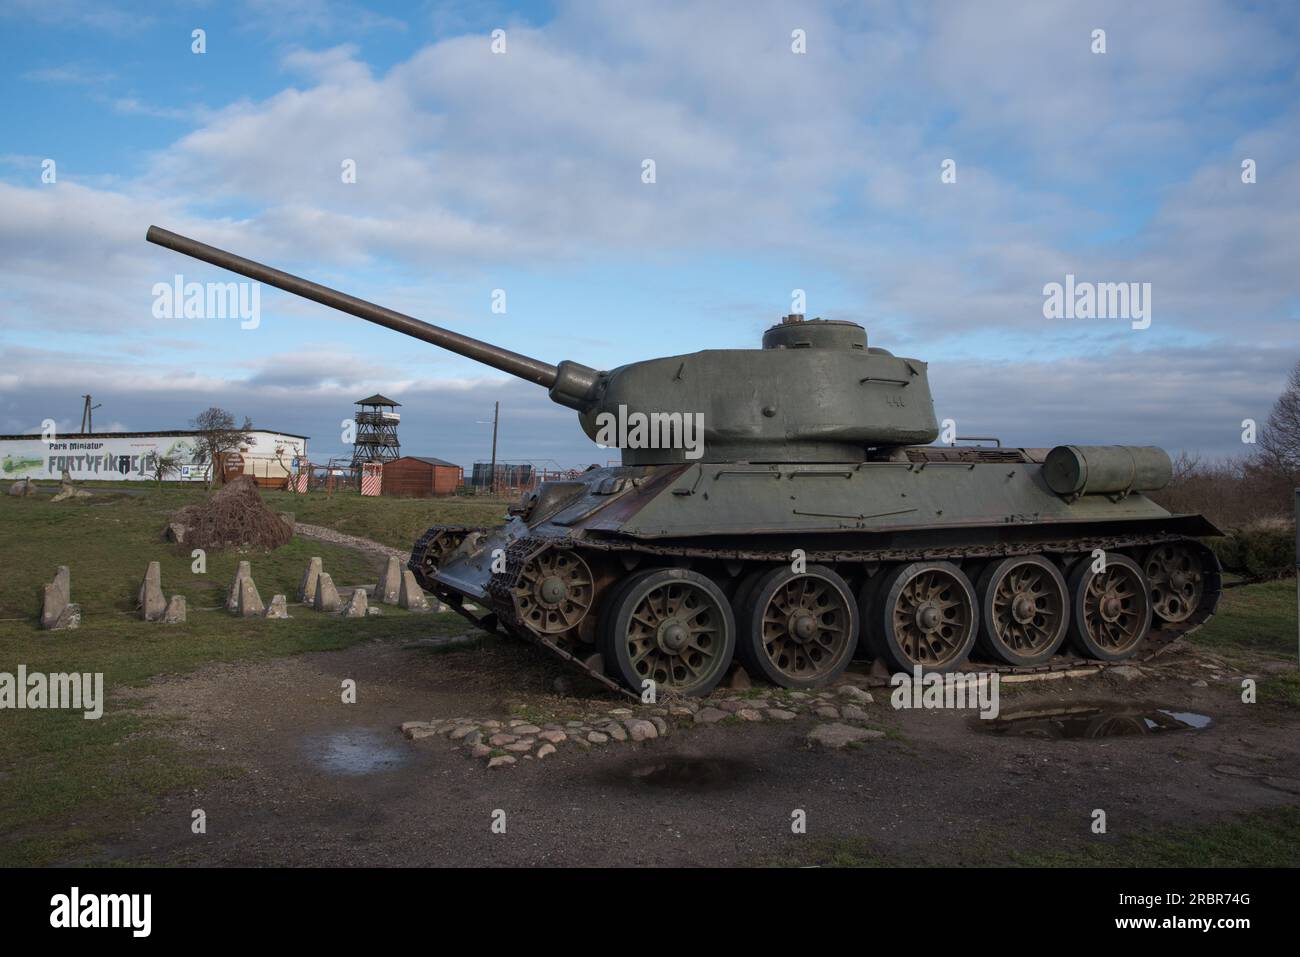 The T-34 was a Soviet medium tank and main battle tank in World War II with production numbers more than any other tank of its time. Stock Photo